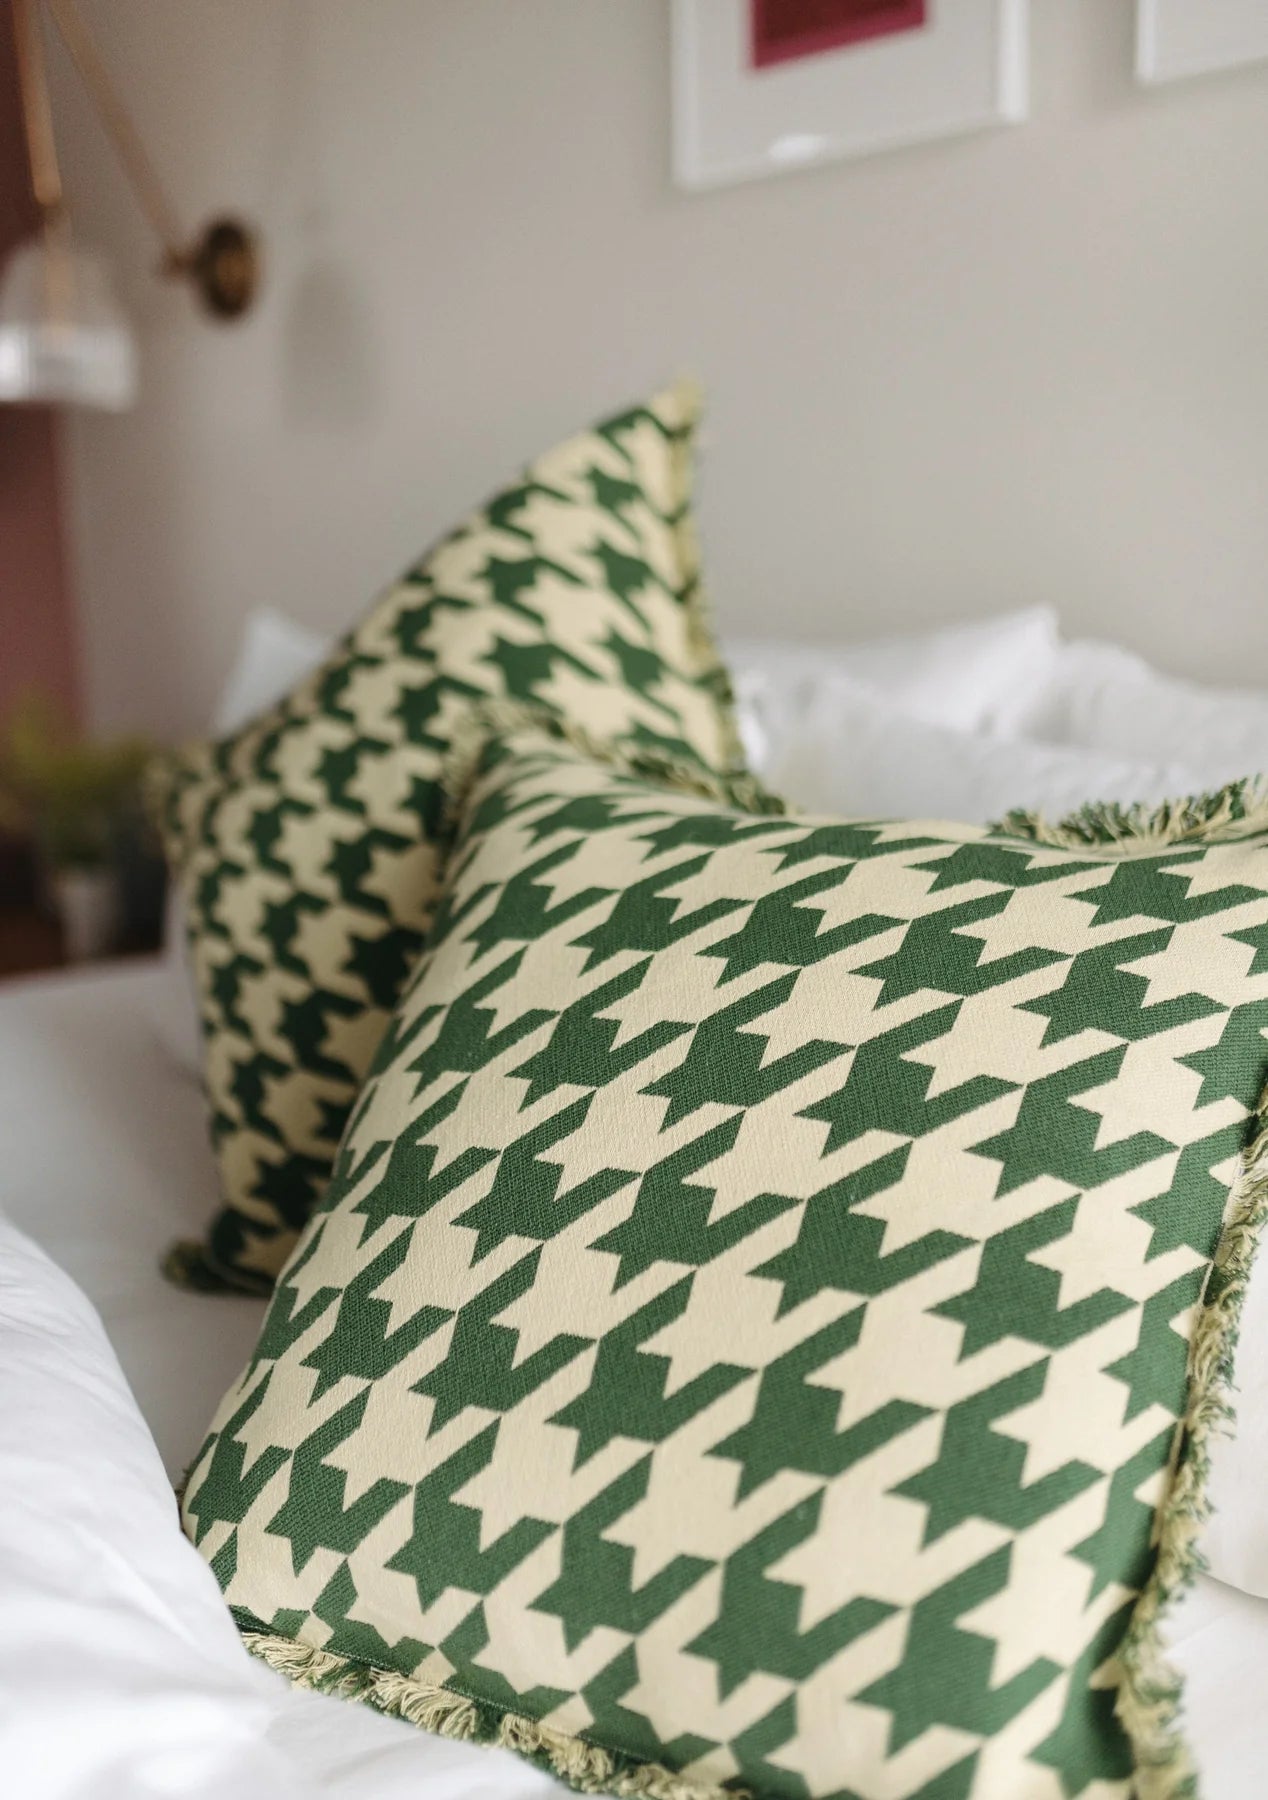 COTTON CUSHION - GREEN HOUNDSTOOTH